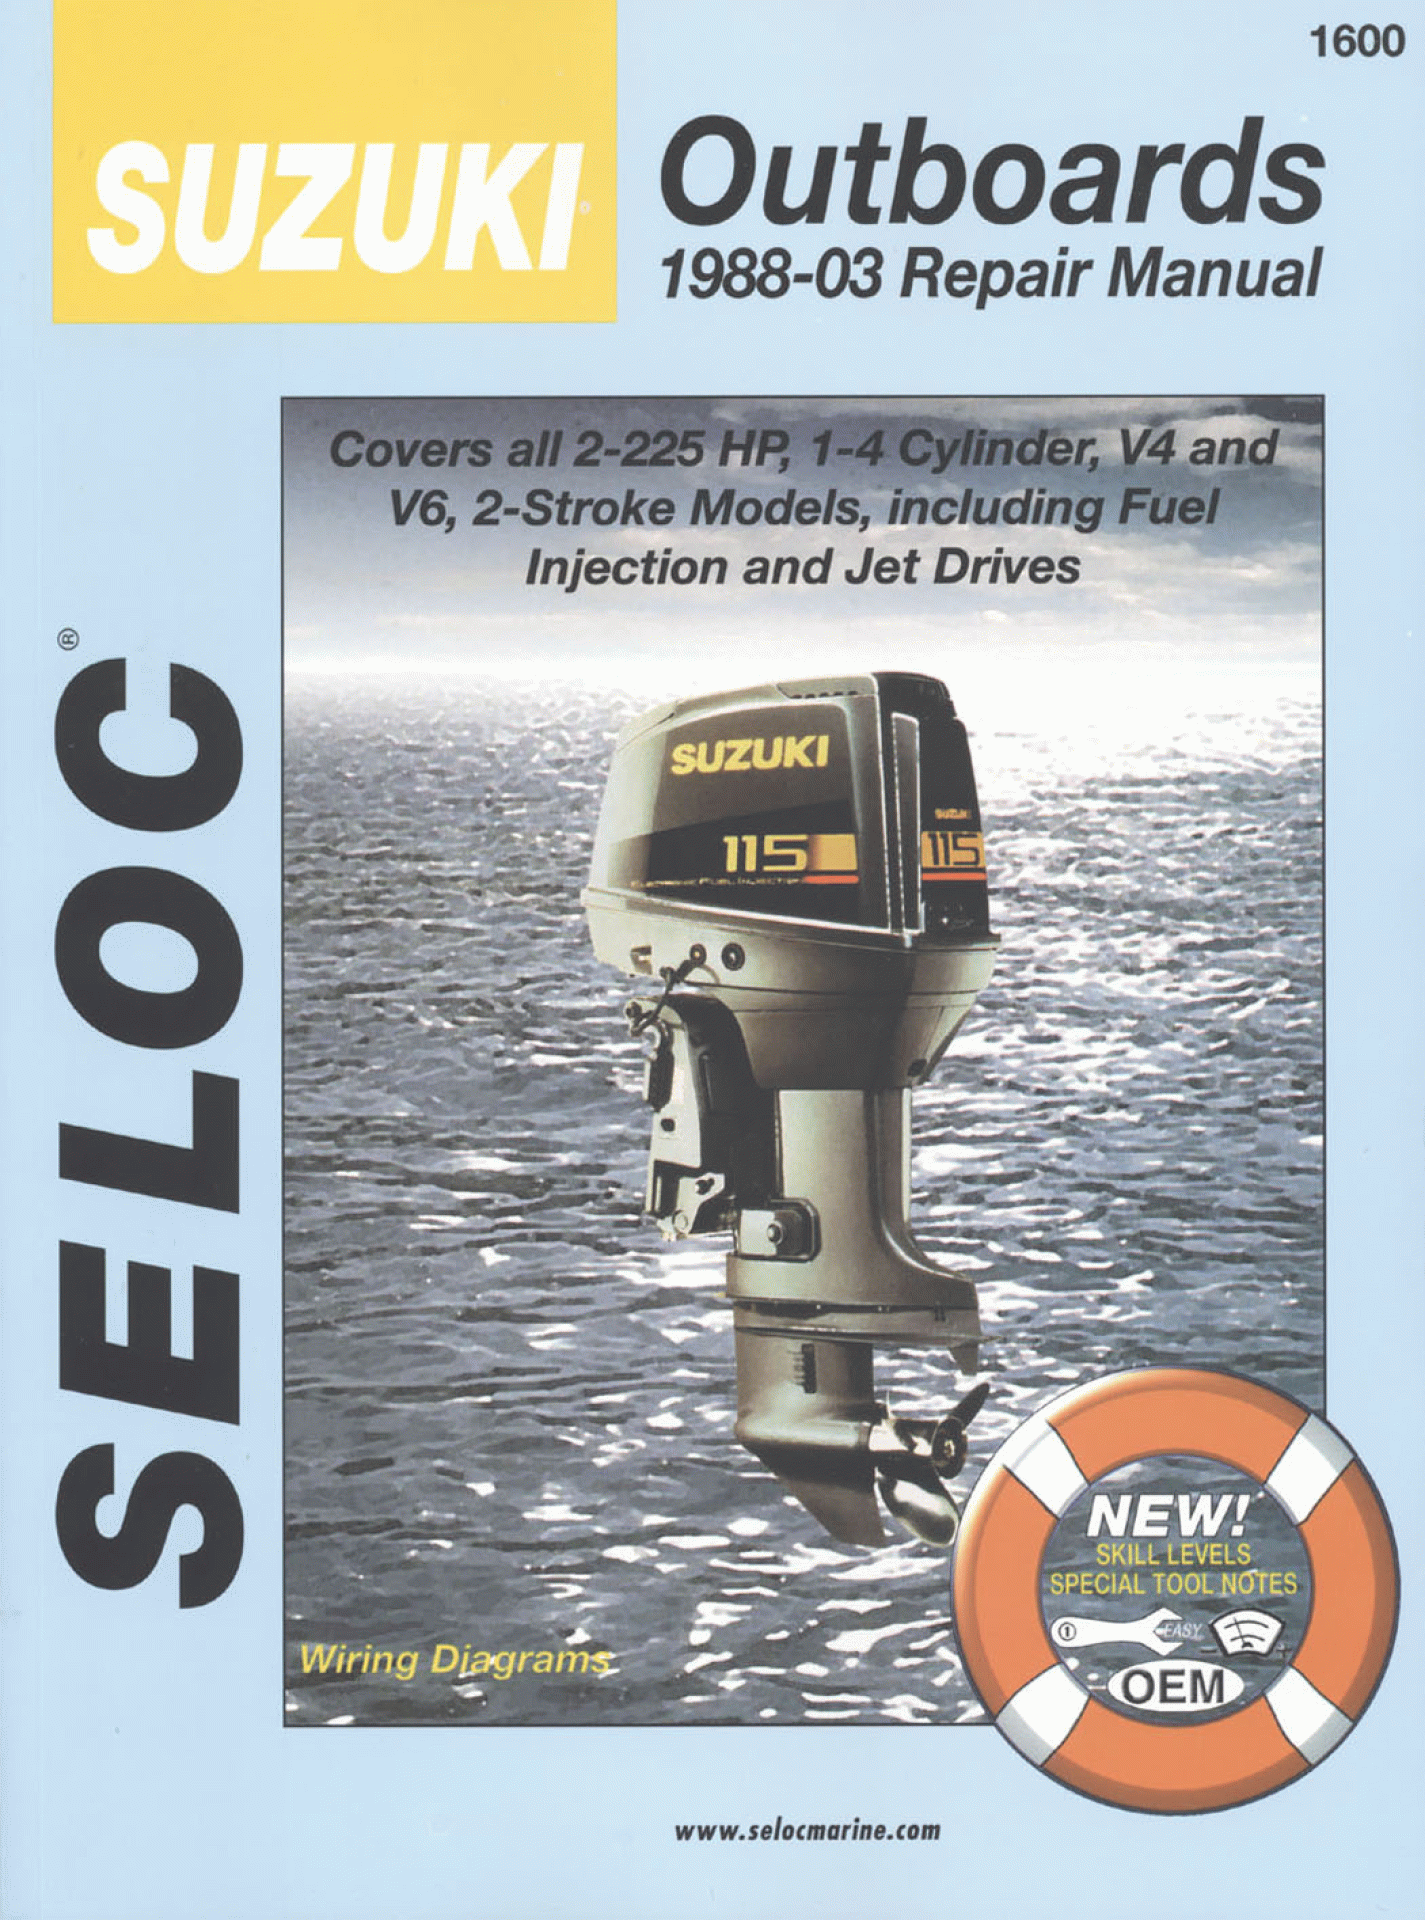 SELOC PUBLISHING | 18-01600 | REPAIR MANUAL Suzuki Outboards All 2-Stroke Engines 1988-03